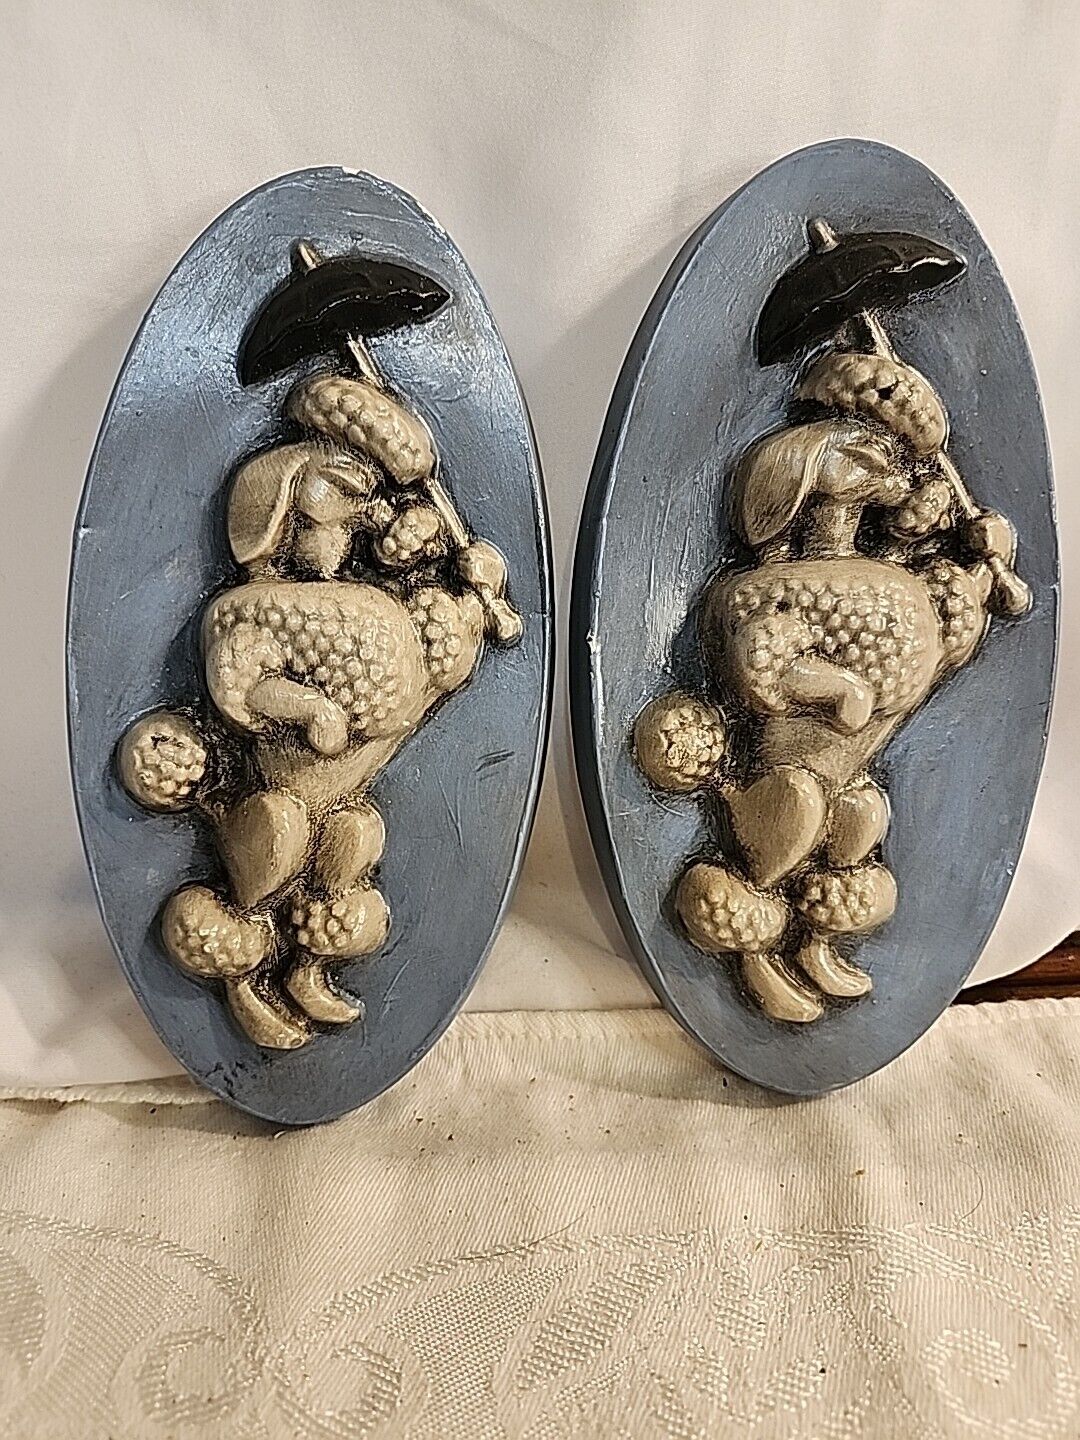 Ceramic Poodle Plaques/Wall Hangings Lot of 2